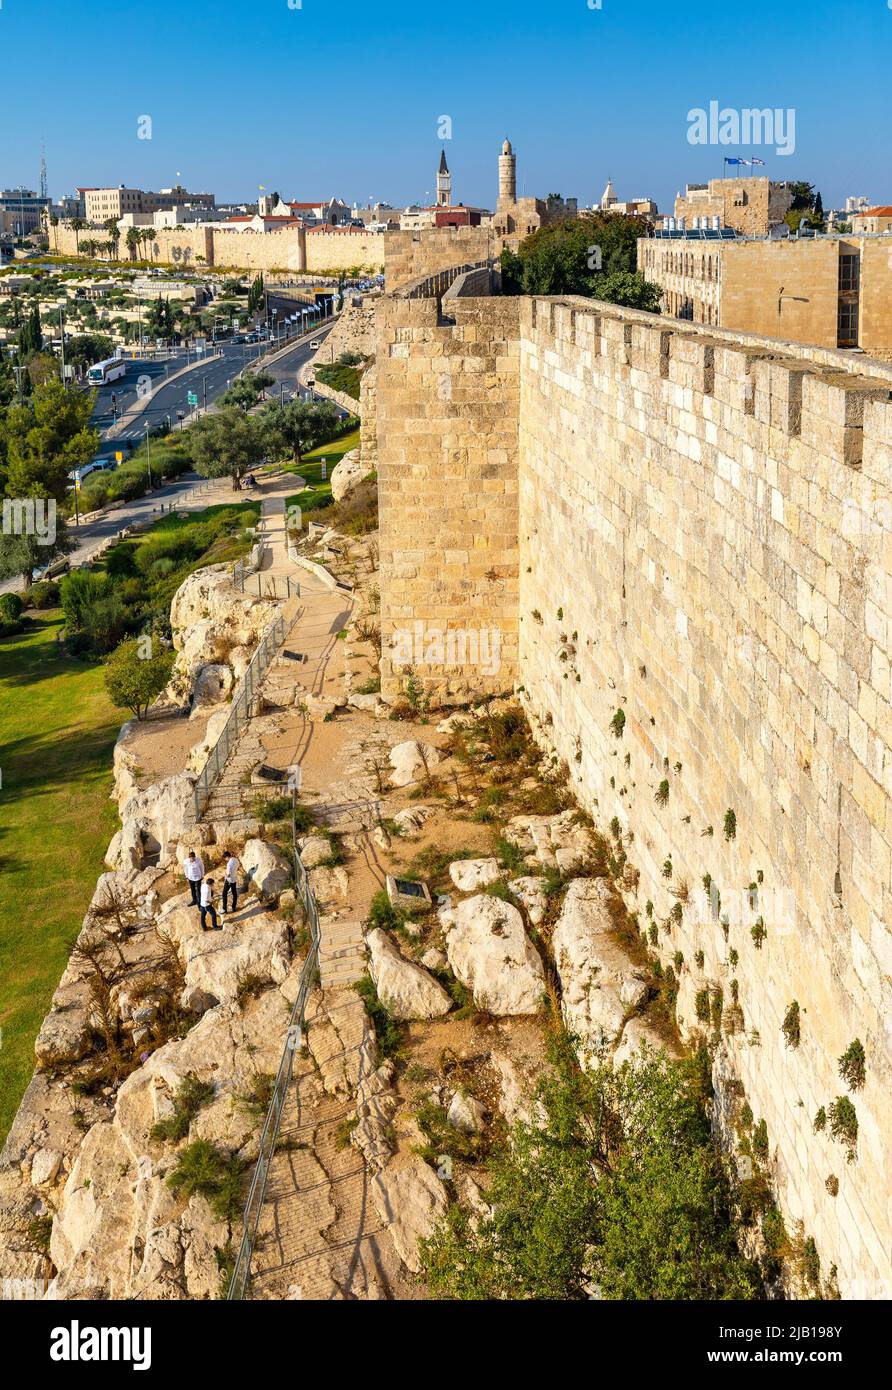 Jerusalem, Israel - October 12, 2017: Walls of Tower Of David citadel and Old City over Jaffa Gate and Hativat Yerushalayim street with Mamilla quarte Stock Photo